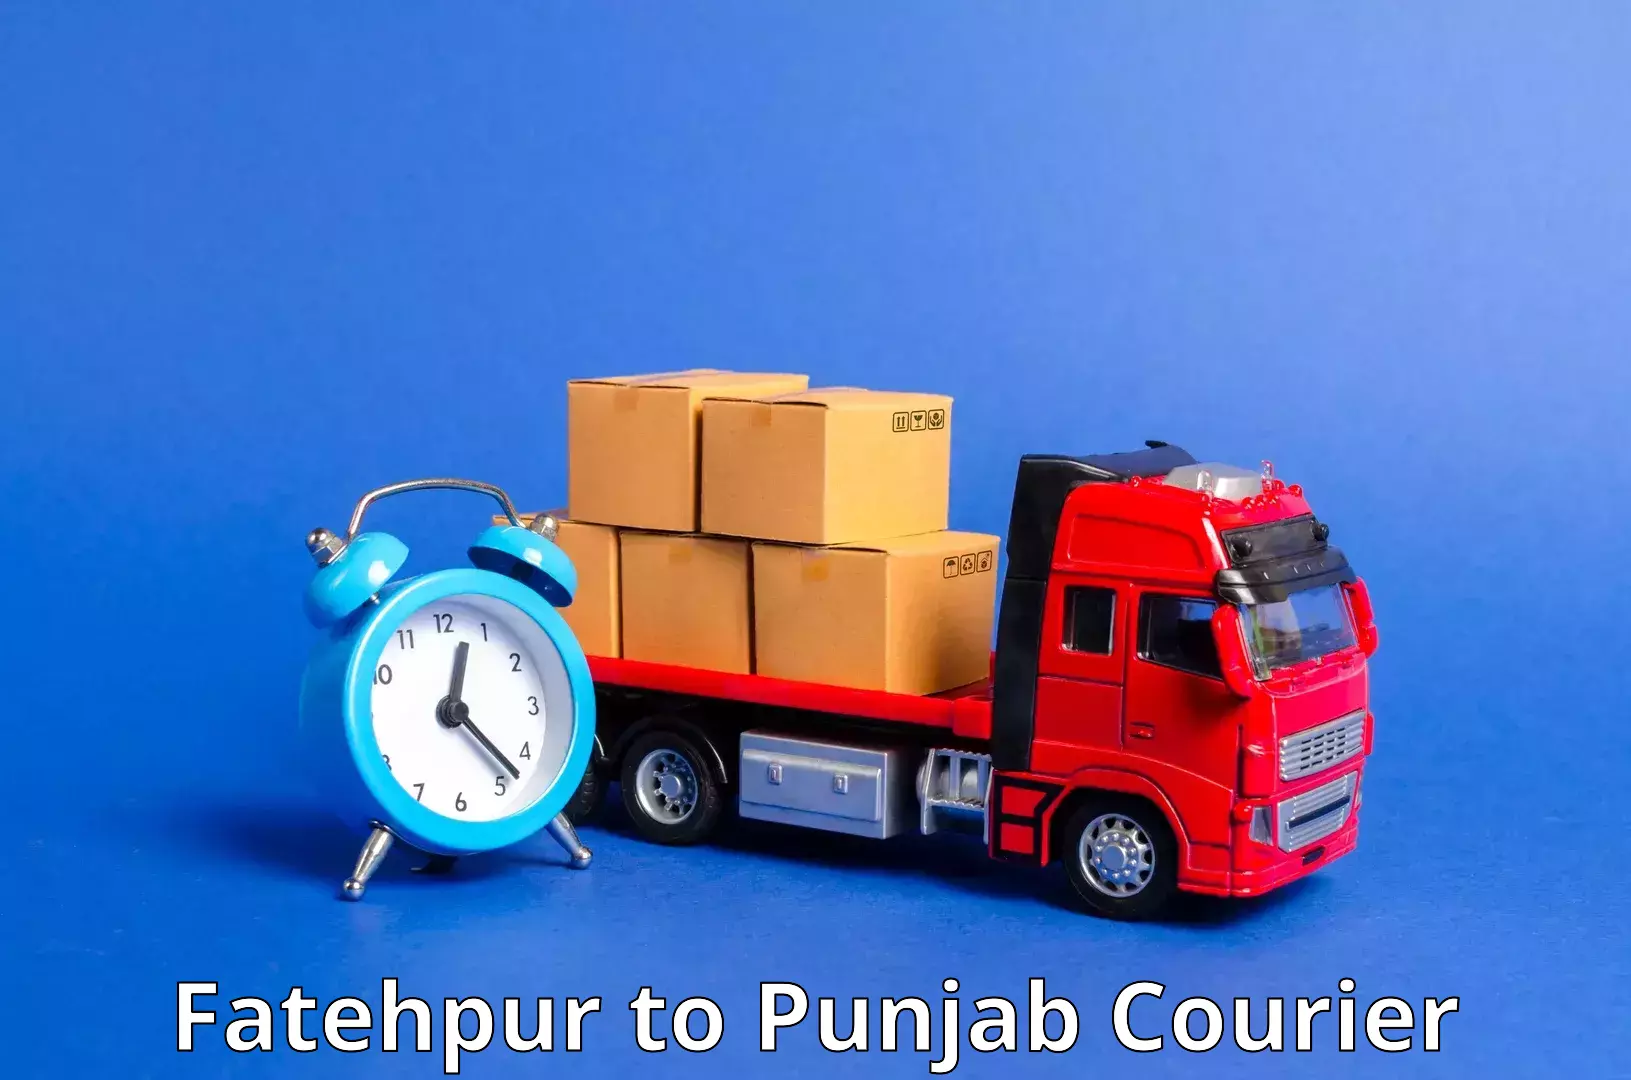 Courier service efficiency in Fatehpur to Mohali